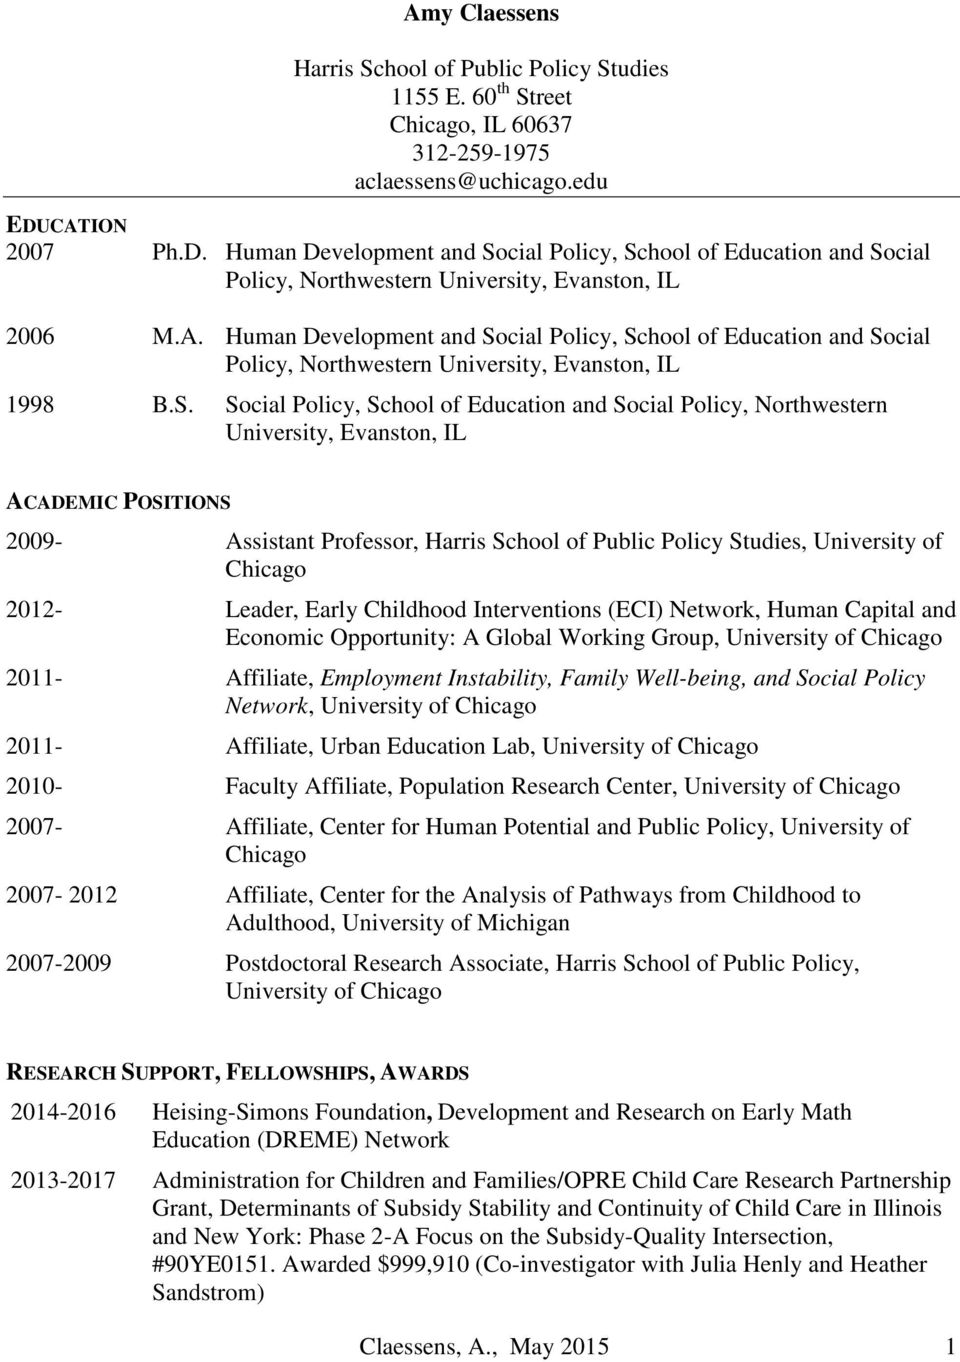 S. Social Policy, School of Education and Social Policy, Northwestern University, Evanston, IL ACADEMIC POSITIONS 2009- Assistant Professor, Harris School of Public Policy Studies, University of